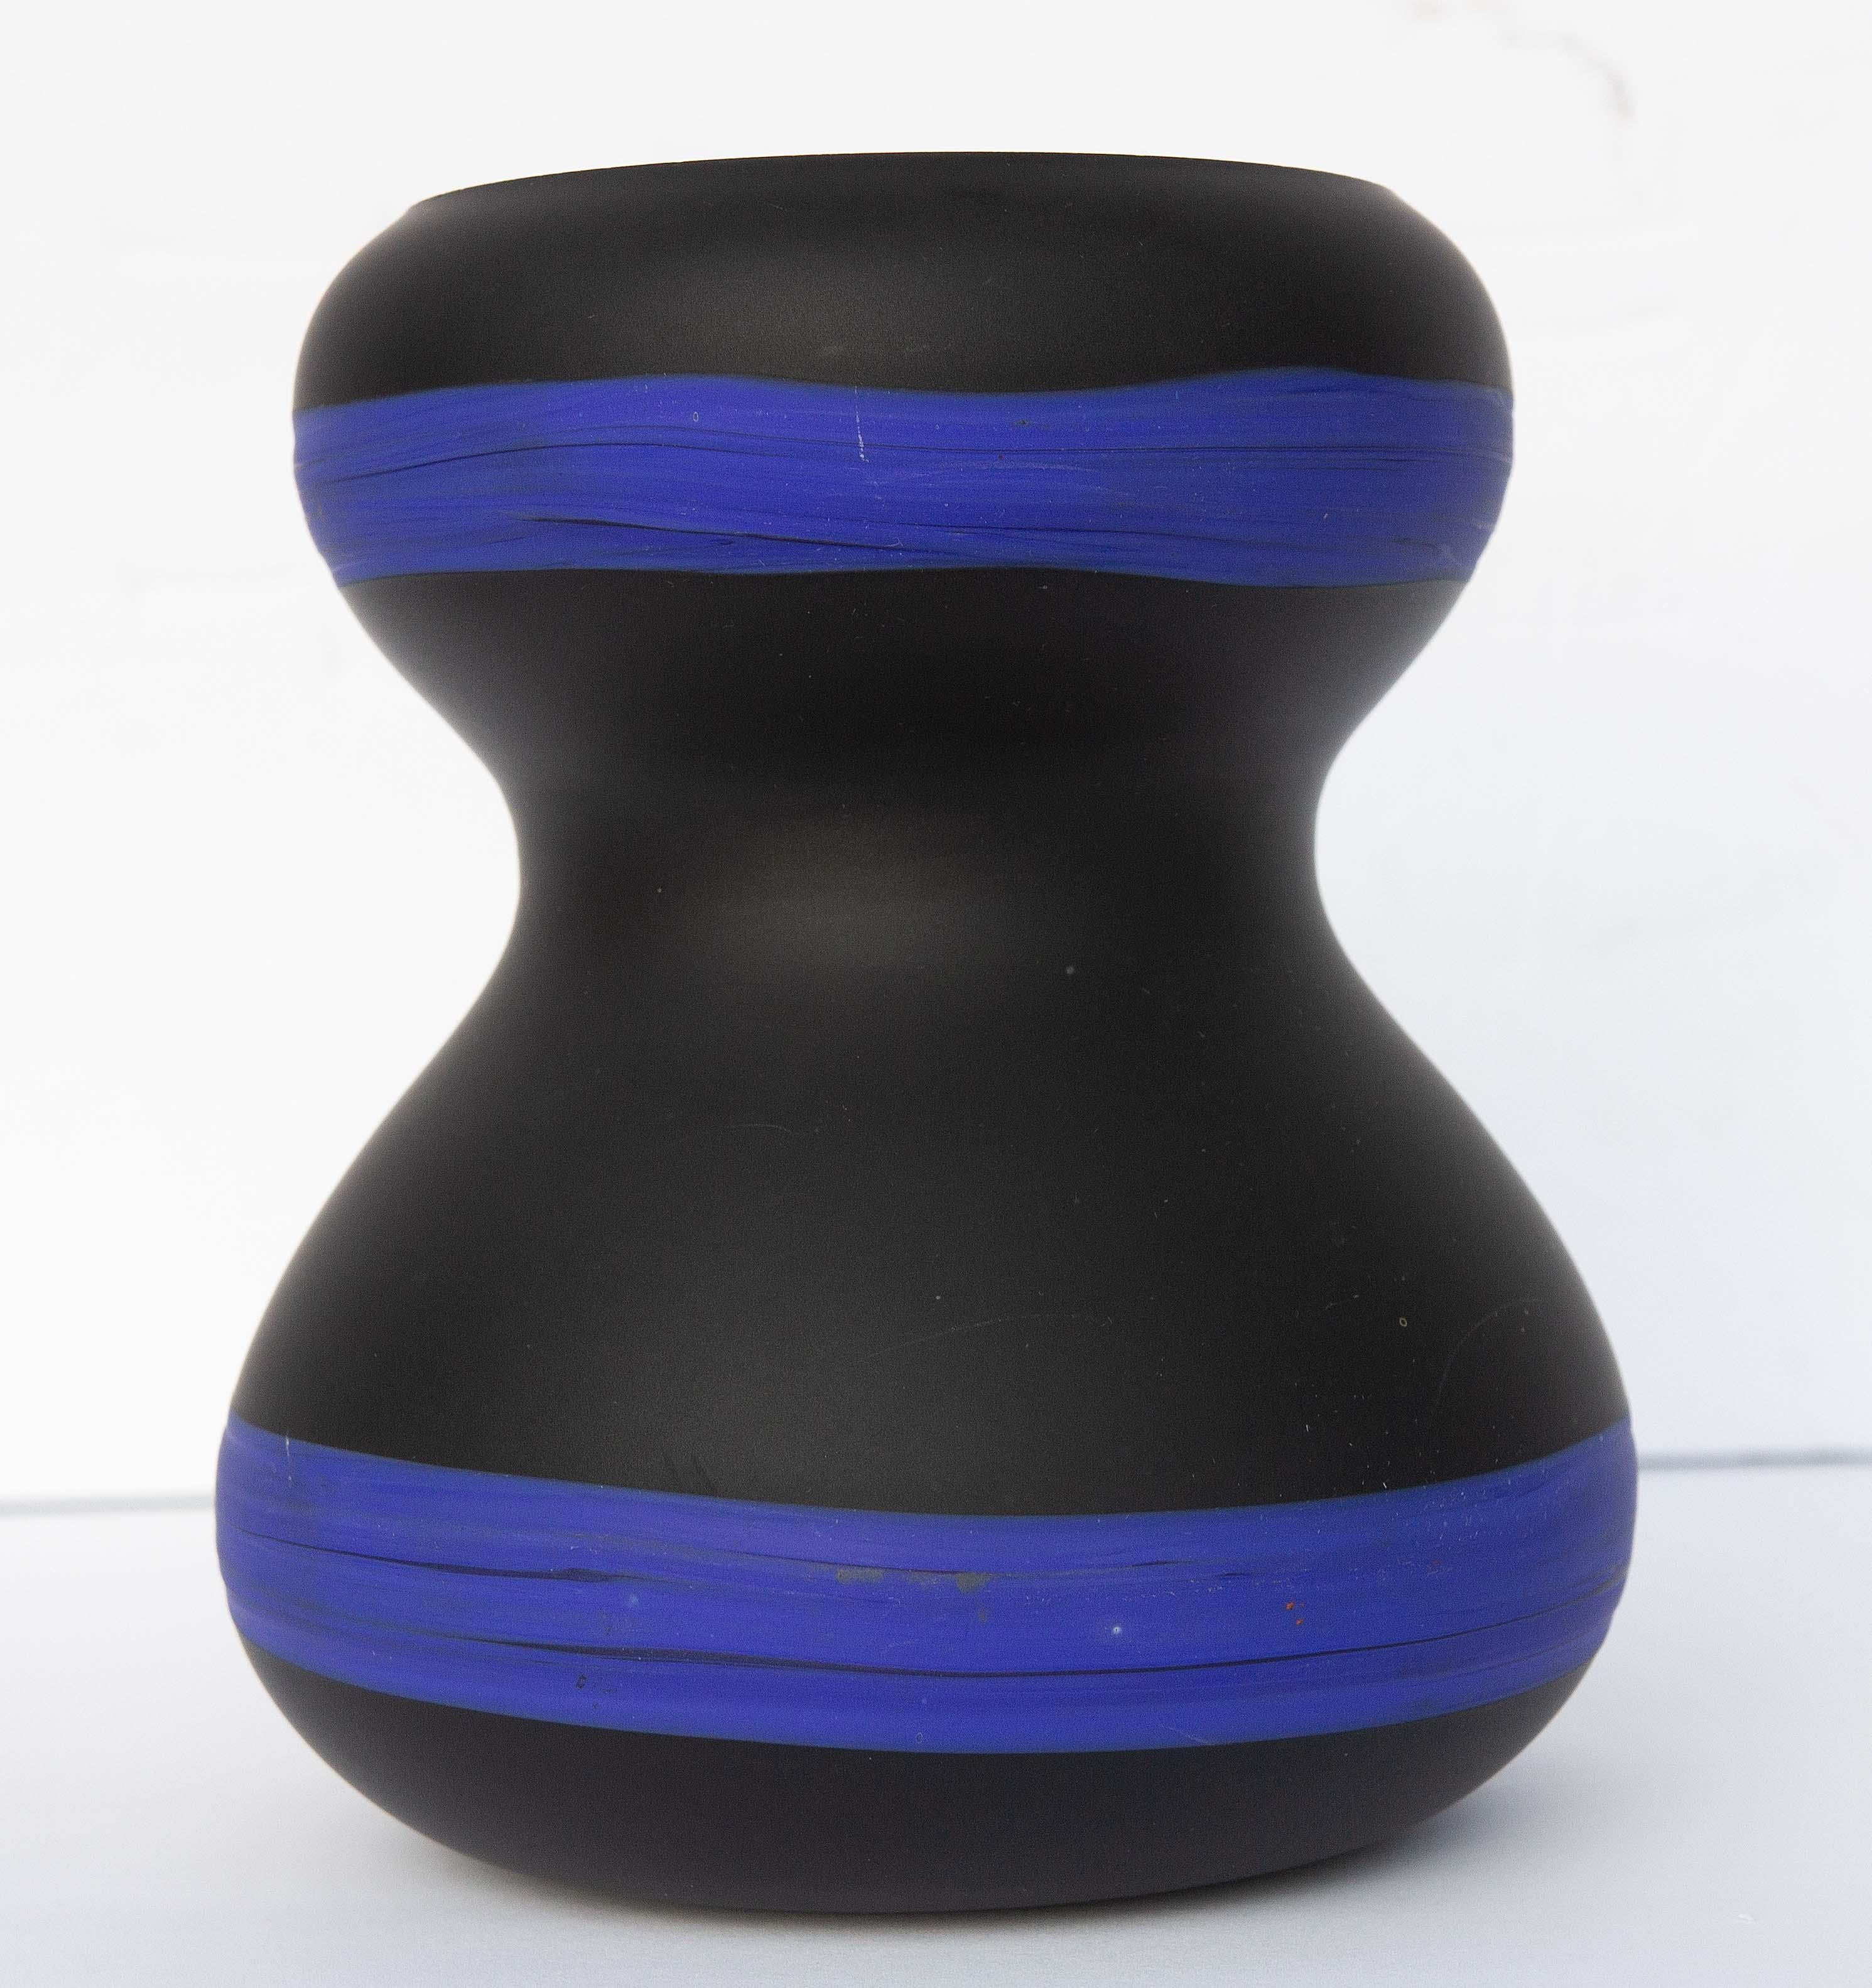 Fratelli Tosa Murano Mid-Century Modern Vase Ebony and Azure Blue In Excellent Condition For Sale In Rochester, NY